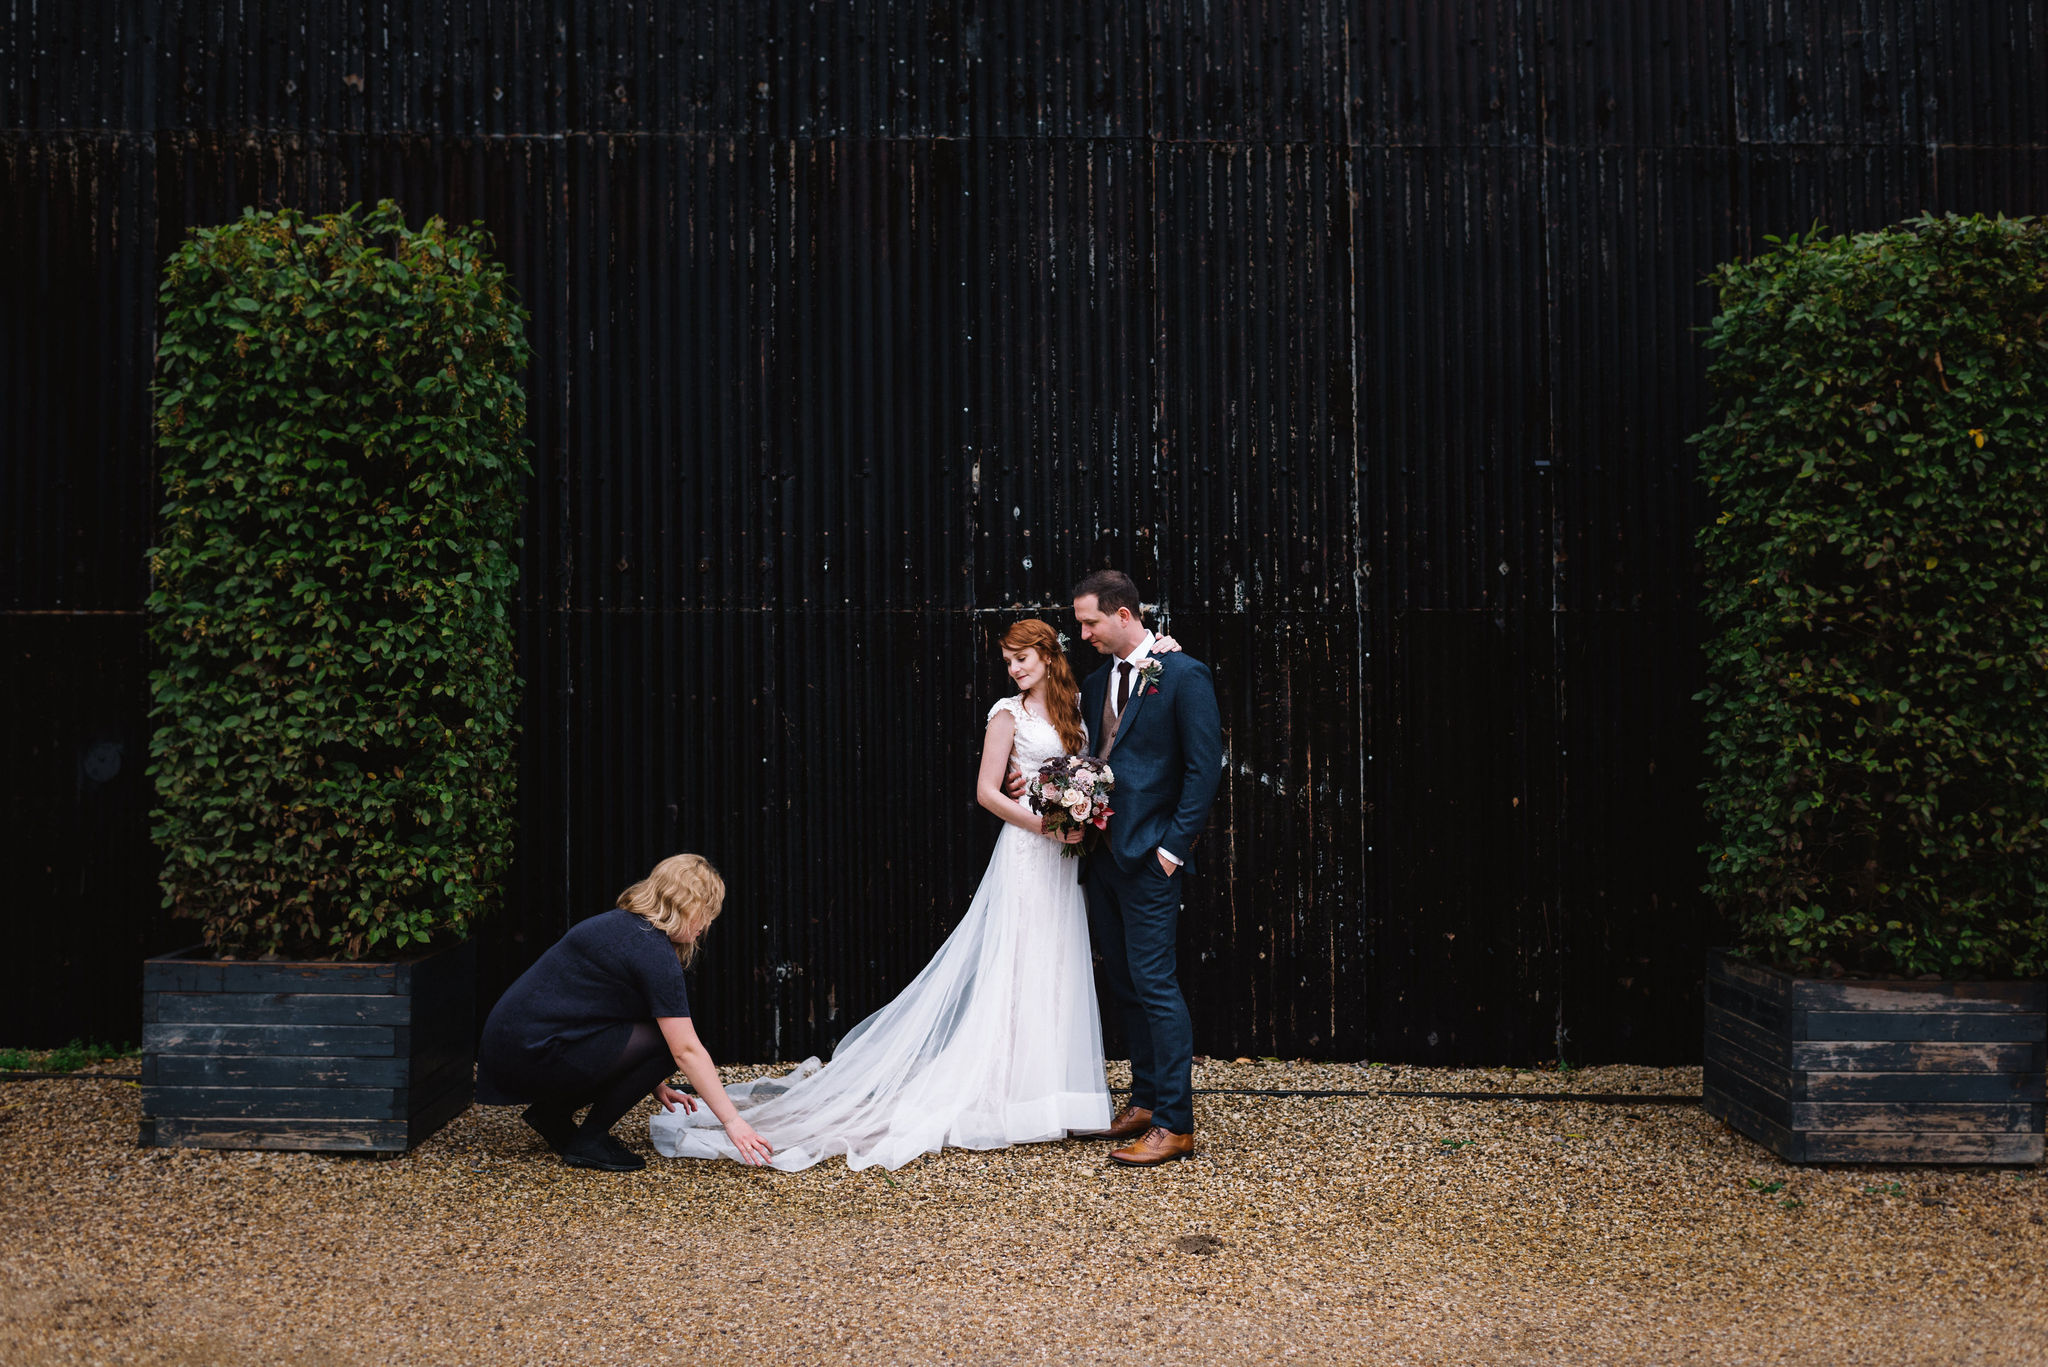 February supplier of the month Whitewed directory blog Tilly Clayden Weddings Wedding planner Gloucestershire Cotswold planning bride to be wedding day laying out the bridal dress couple photos